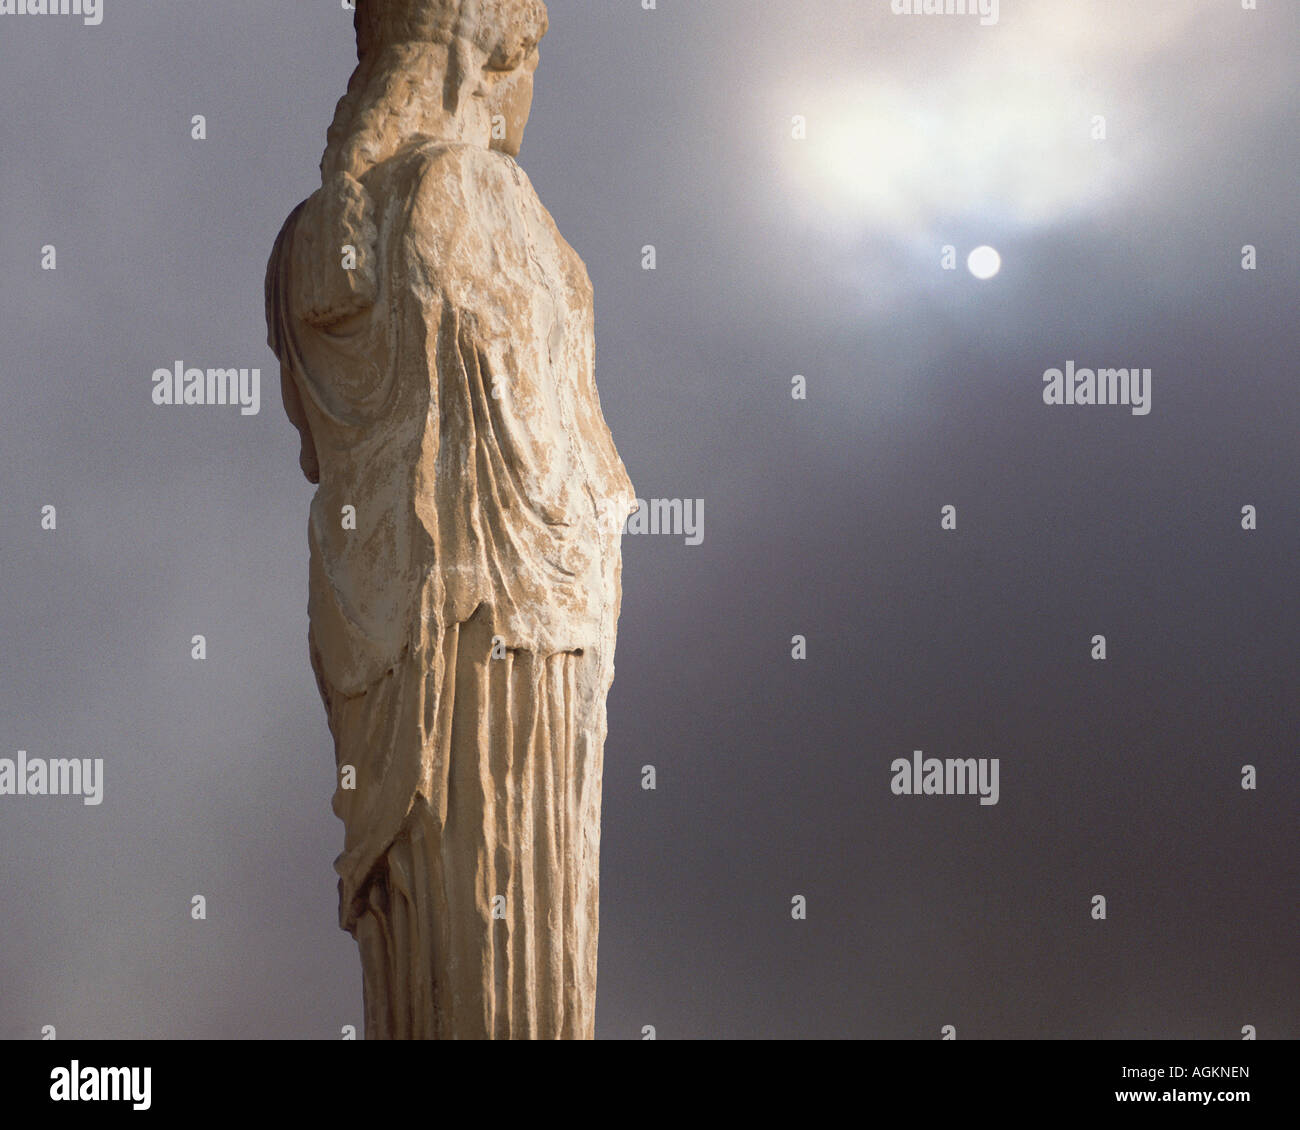 Europe, Greece, Athens. A caryatid from the classical era stands adjacent to the Parthenon at the Acropolis. (digital composite) Stock Photo